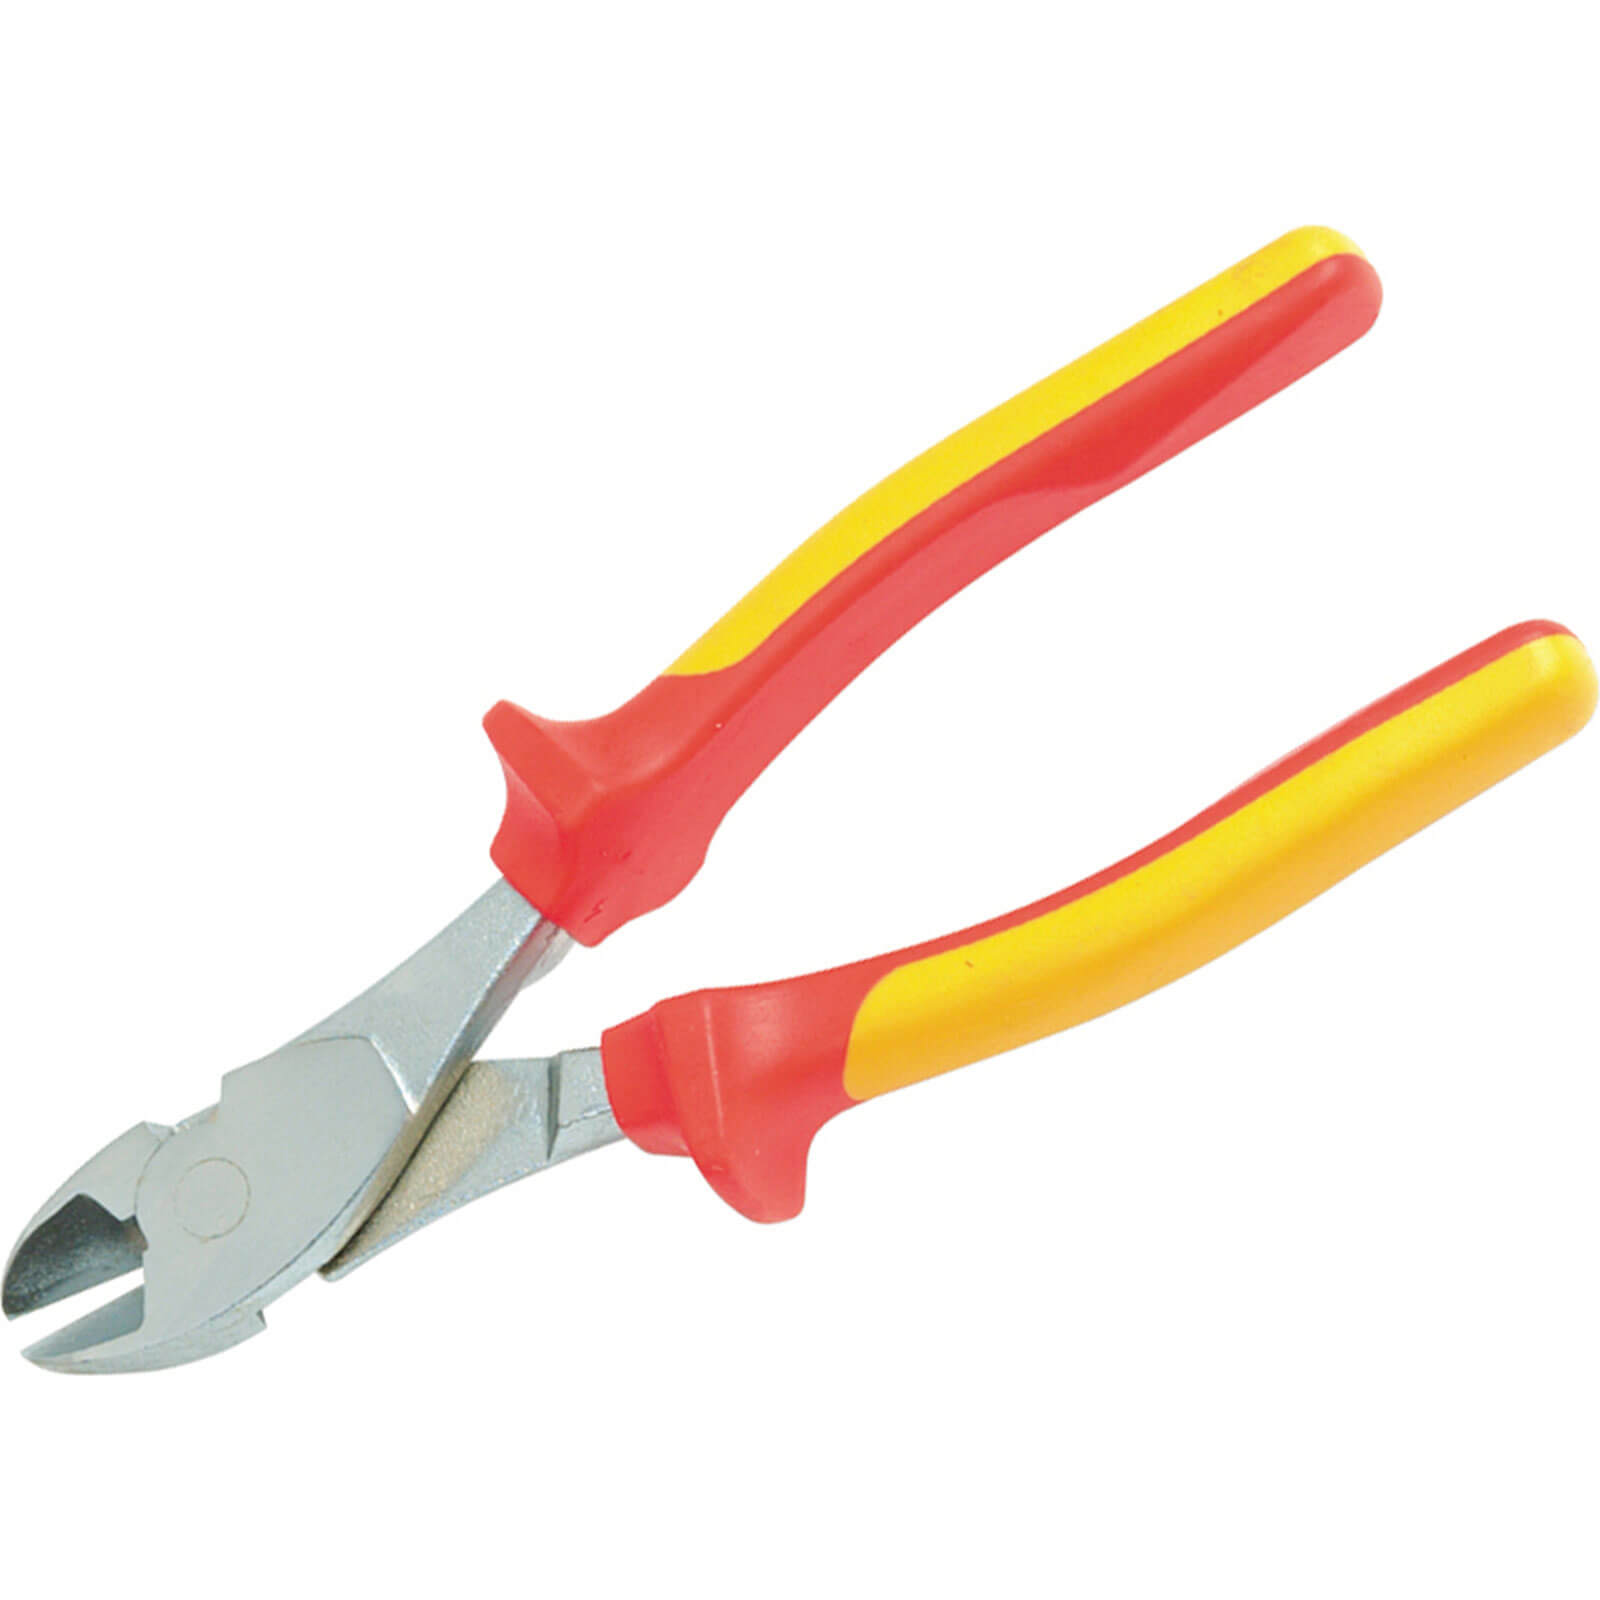 Image of Stanley Heavy Duty Insulated Side Cutters 160mm